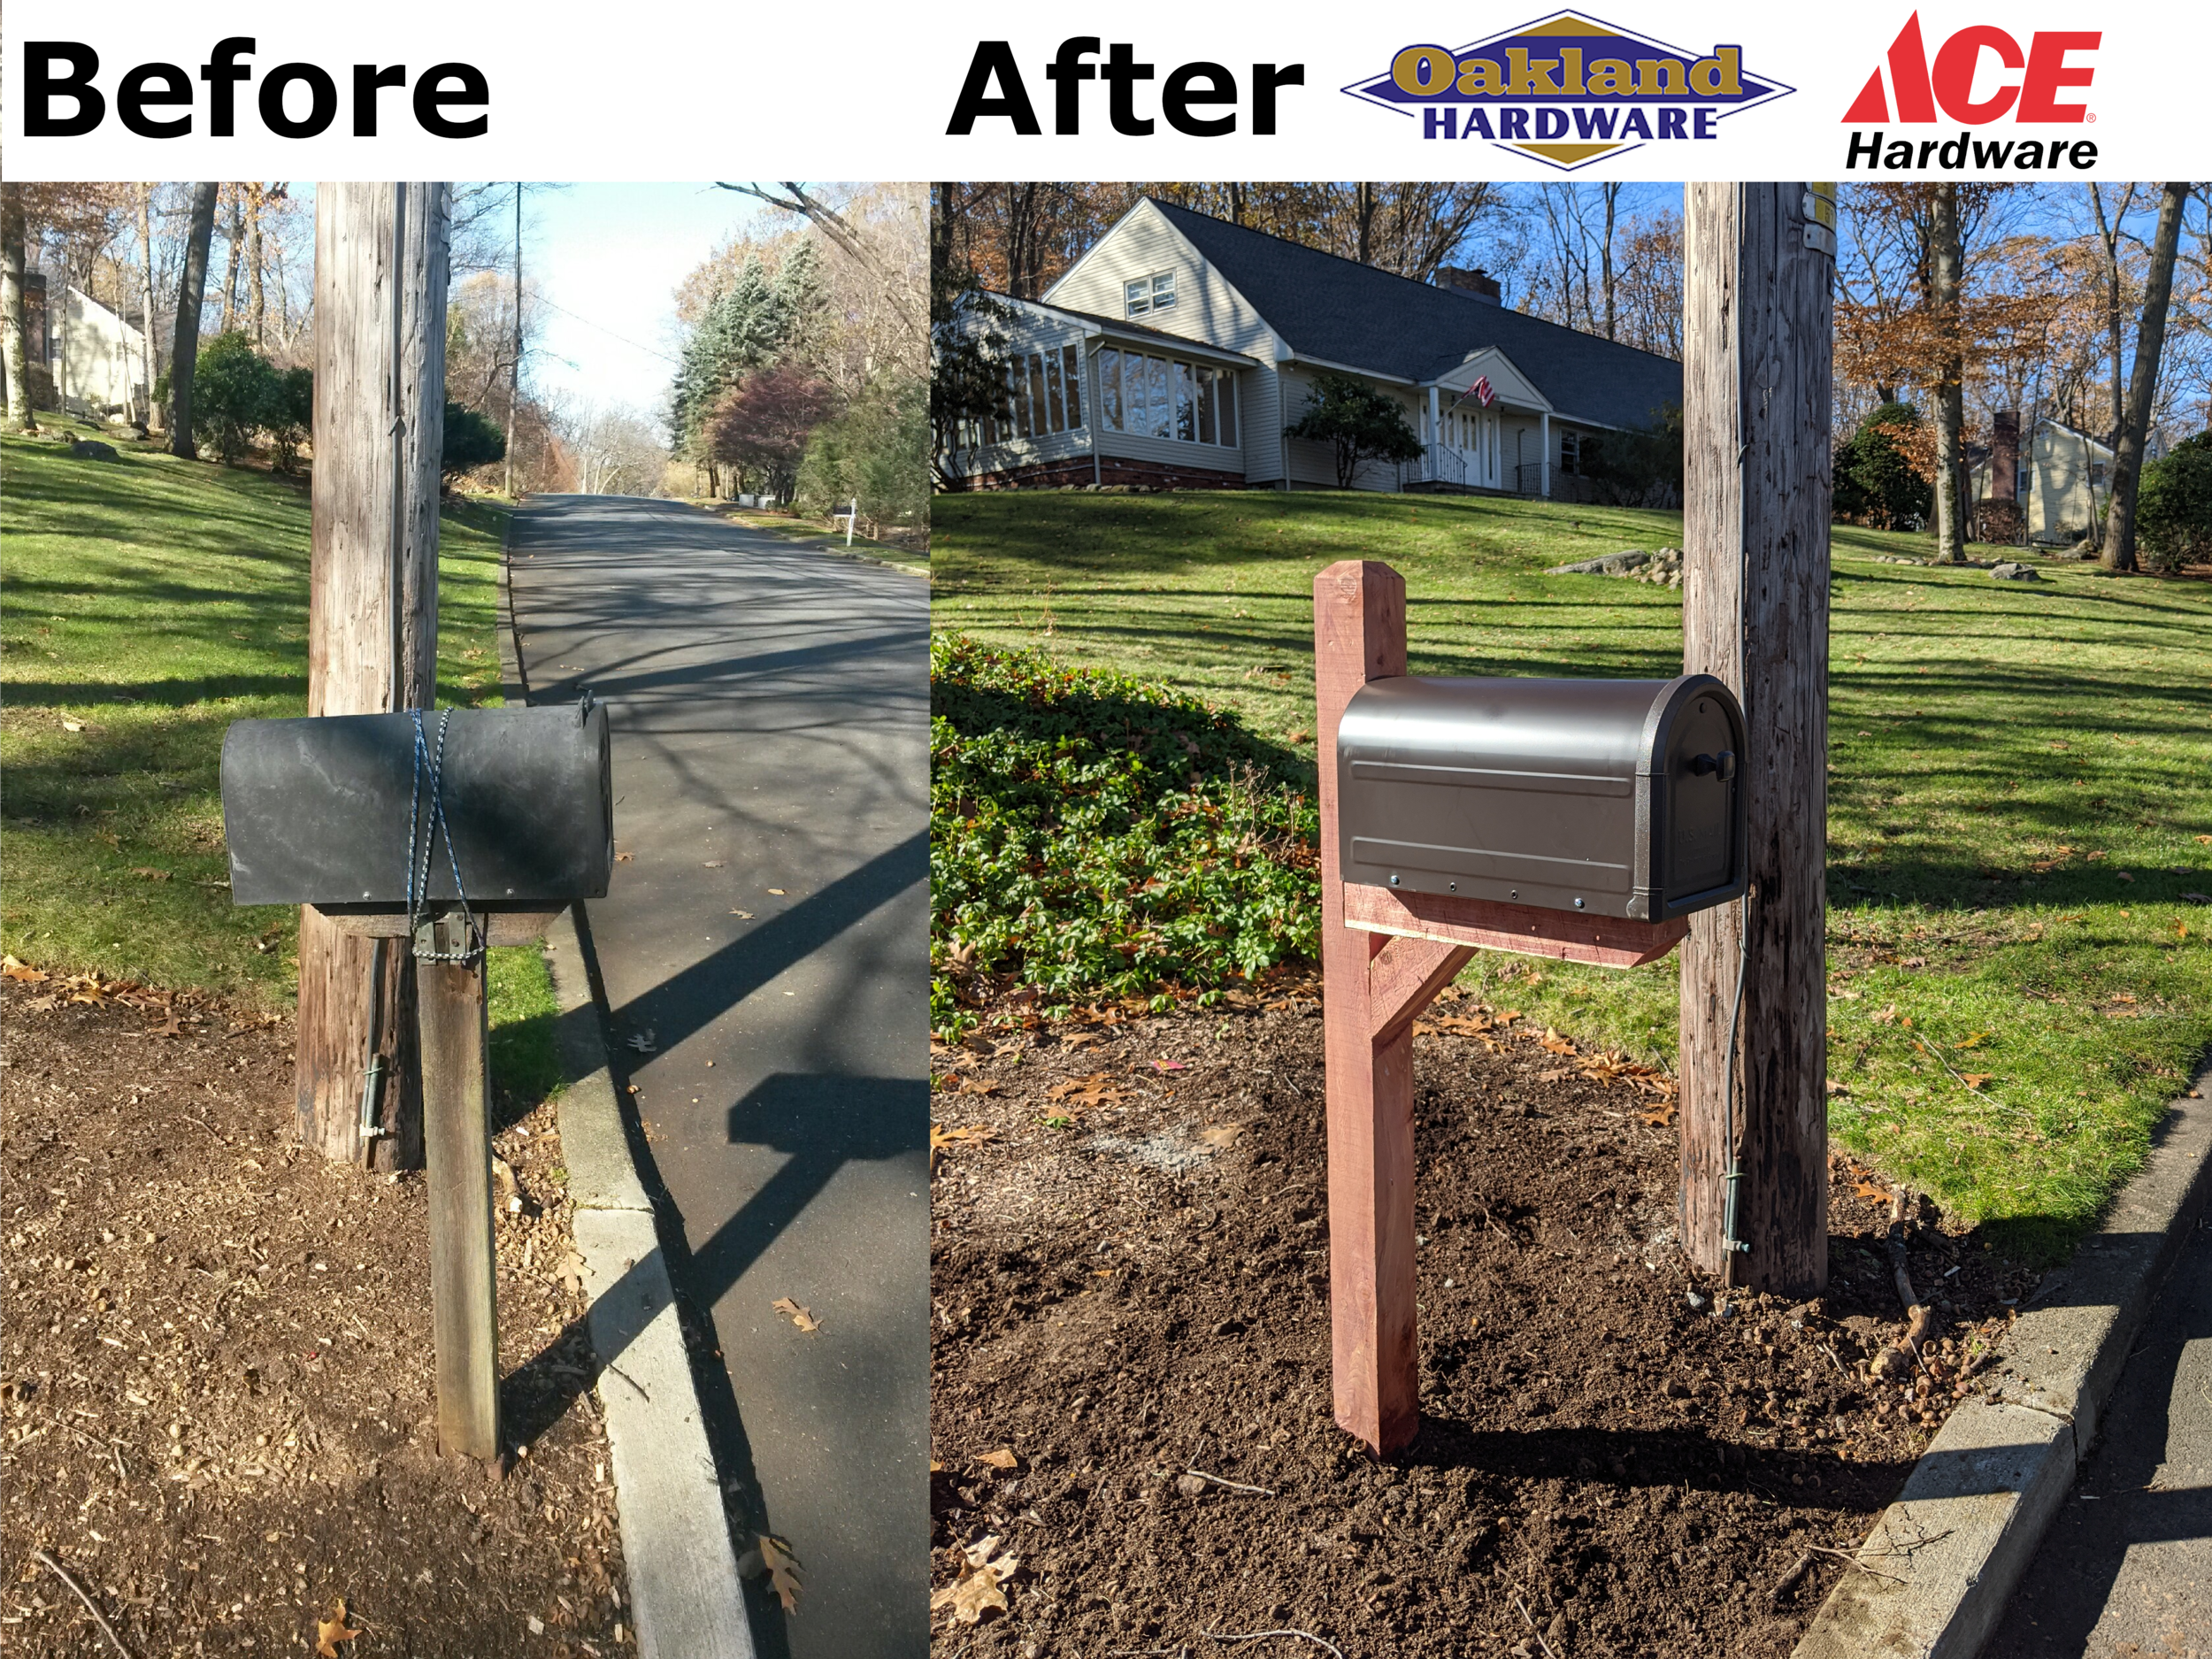 Before and After images of a dilapidated mailbox falling off it's post, and the new mailbox replaced with new post.